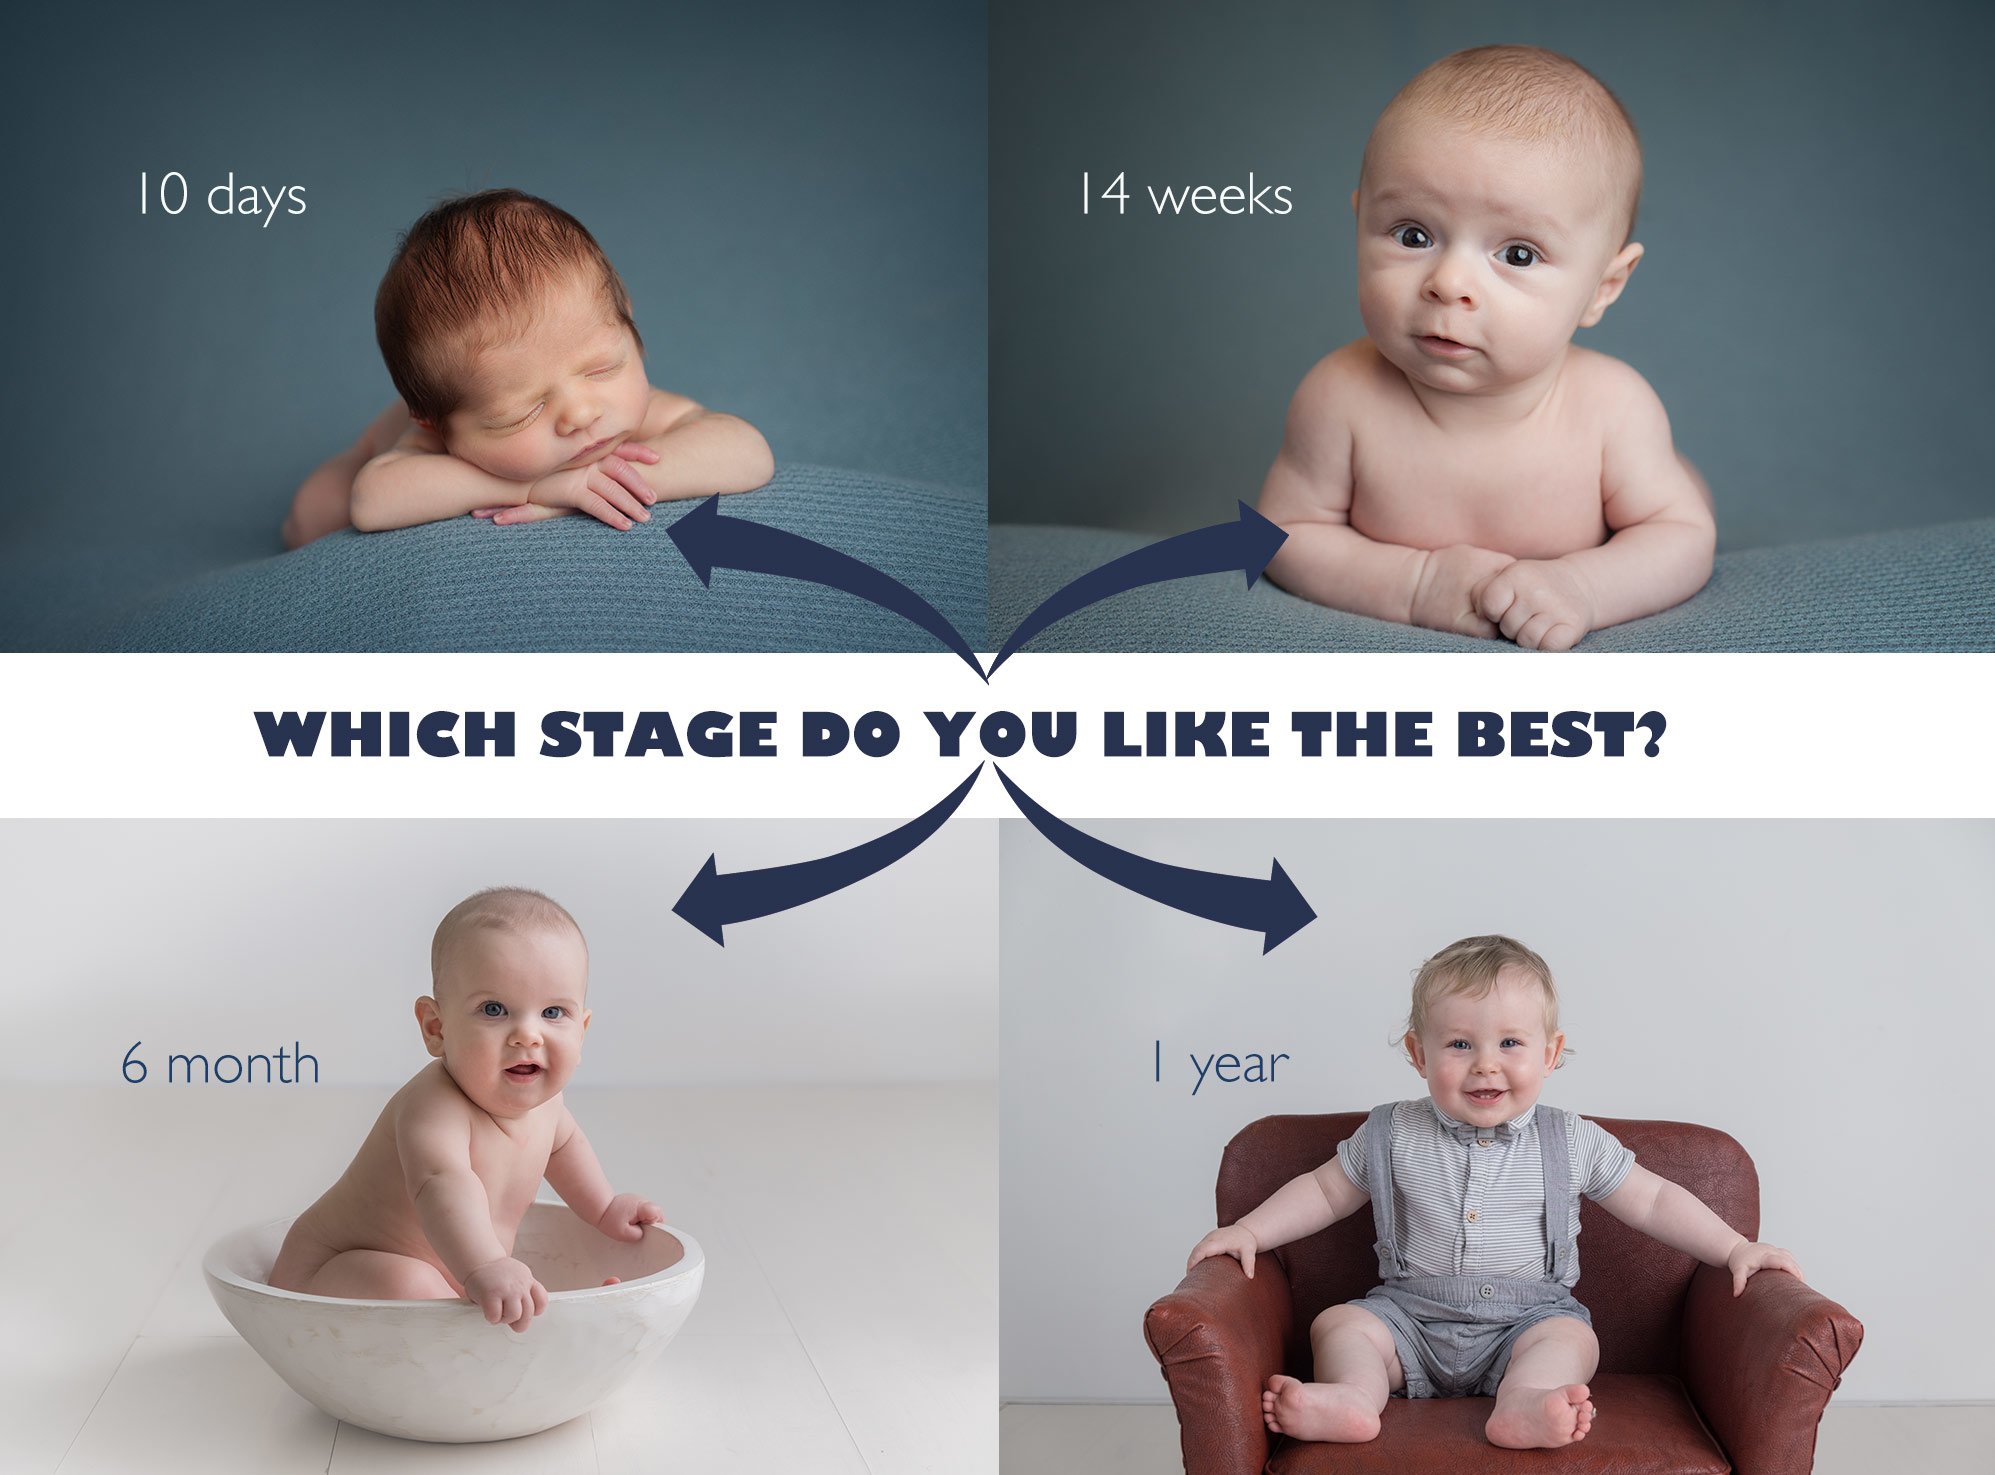 Parents guide how to prepare for a newborn photo session. 1